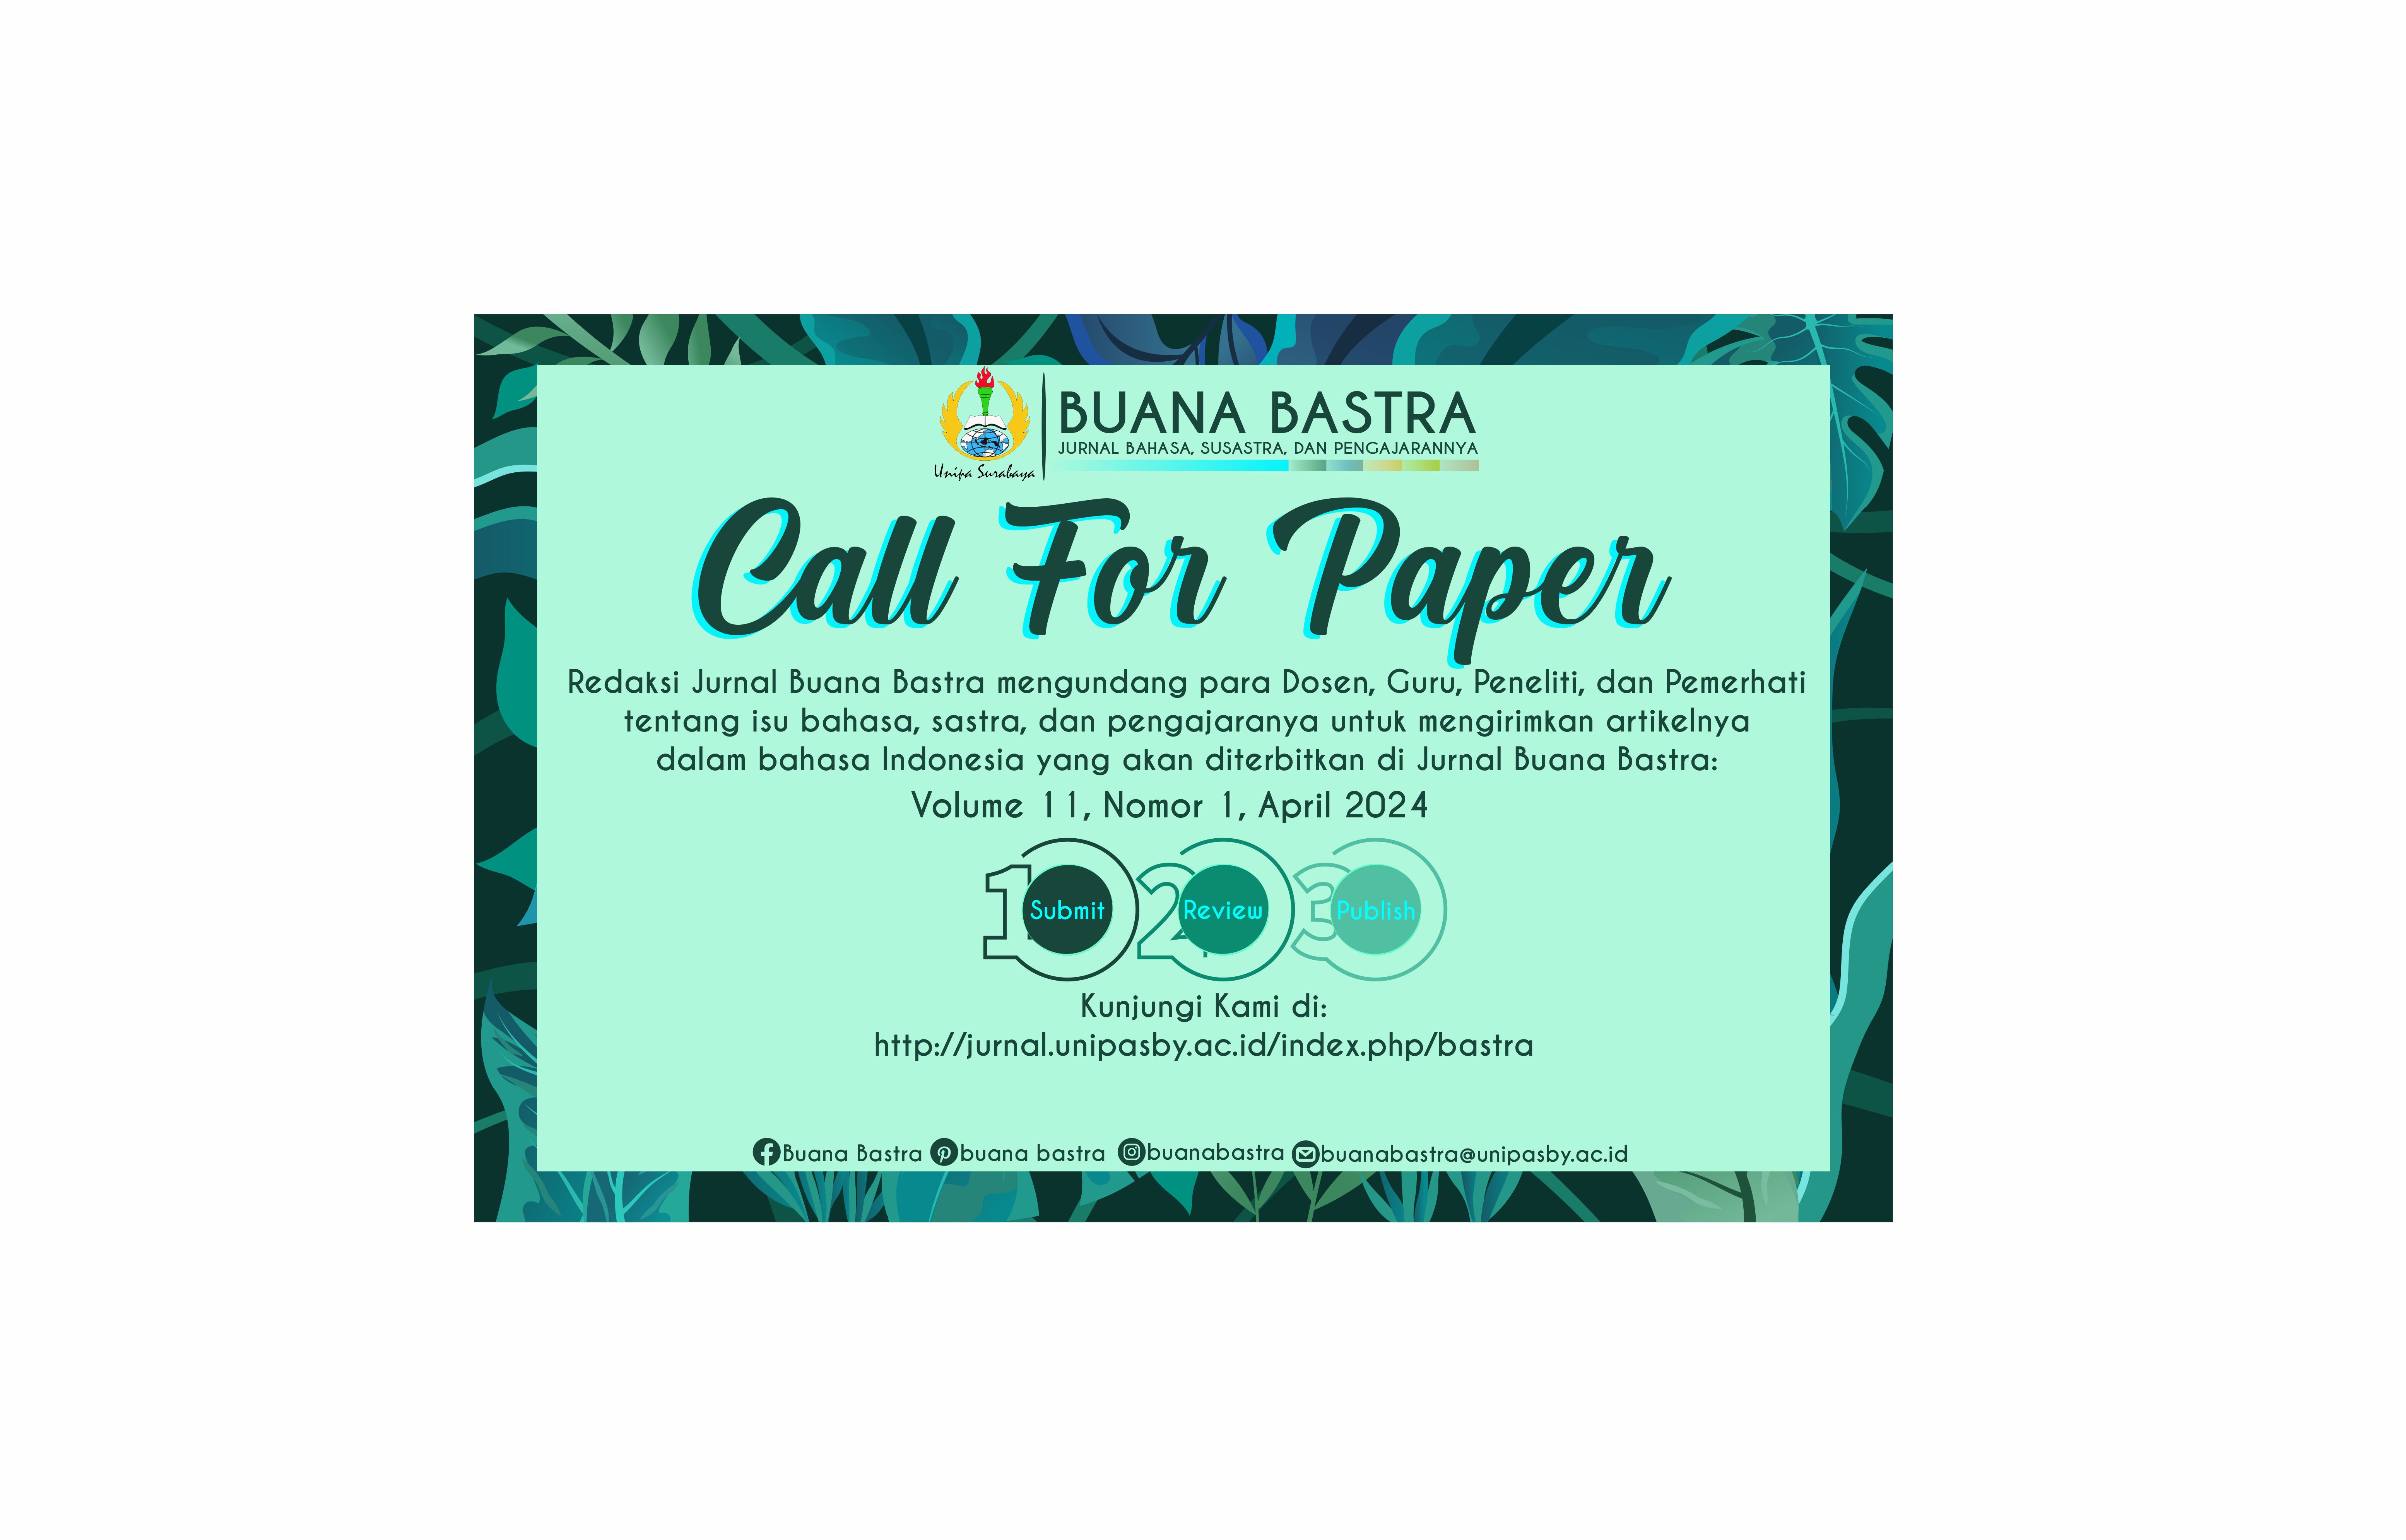 CALL FOR PAPER neww